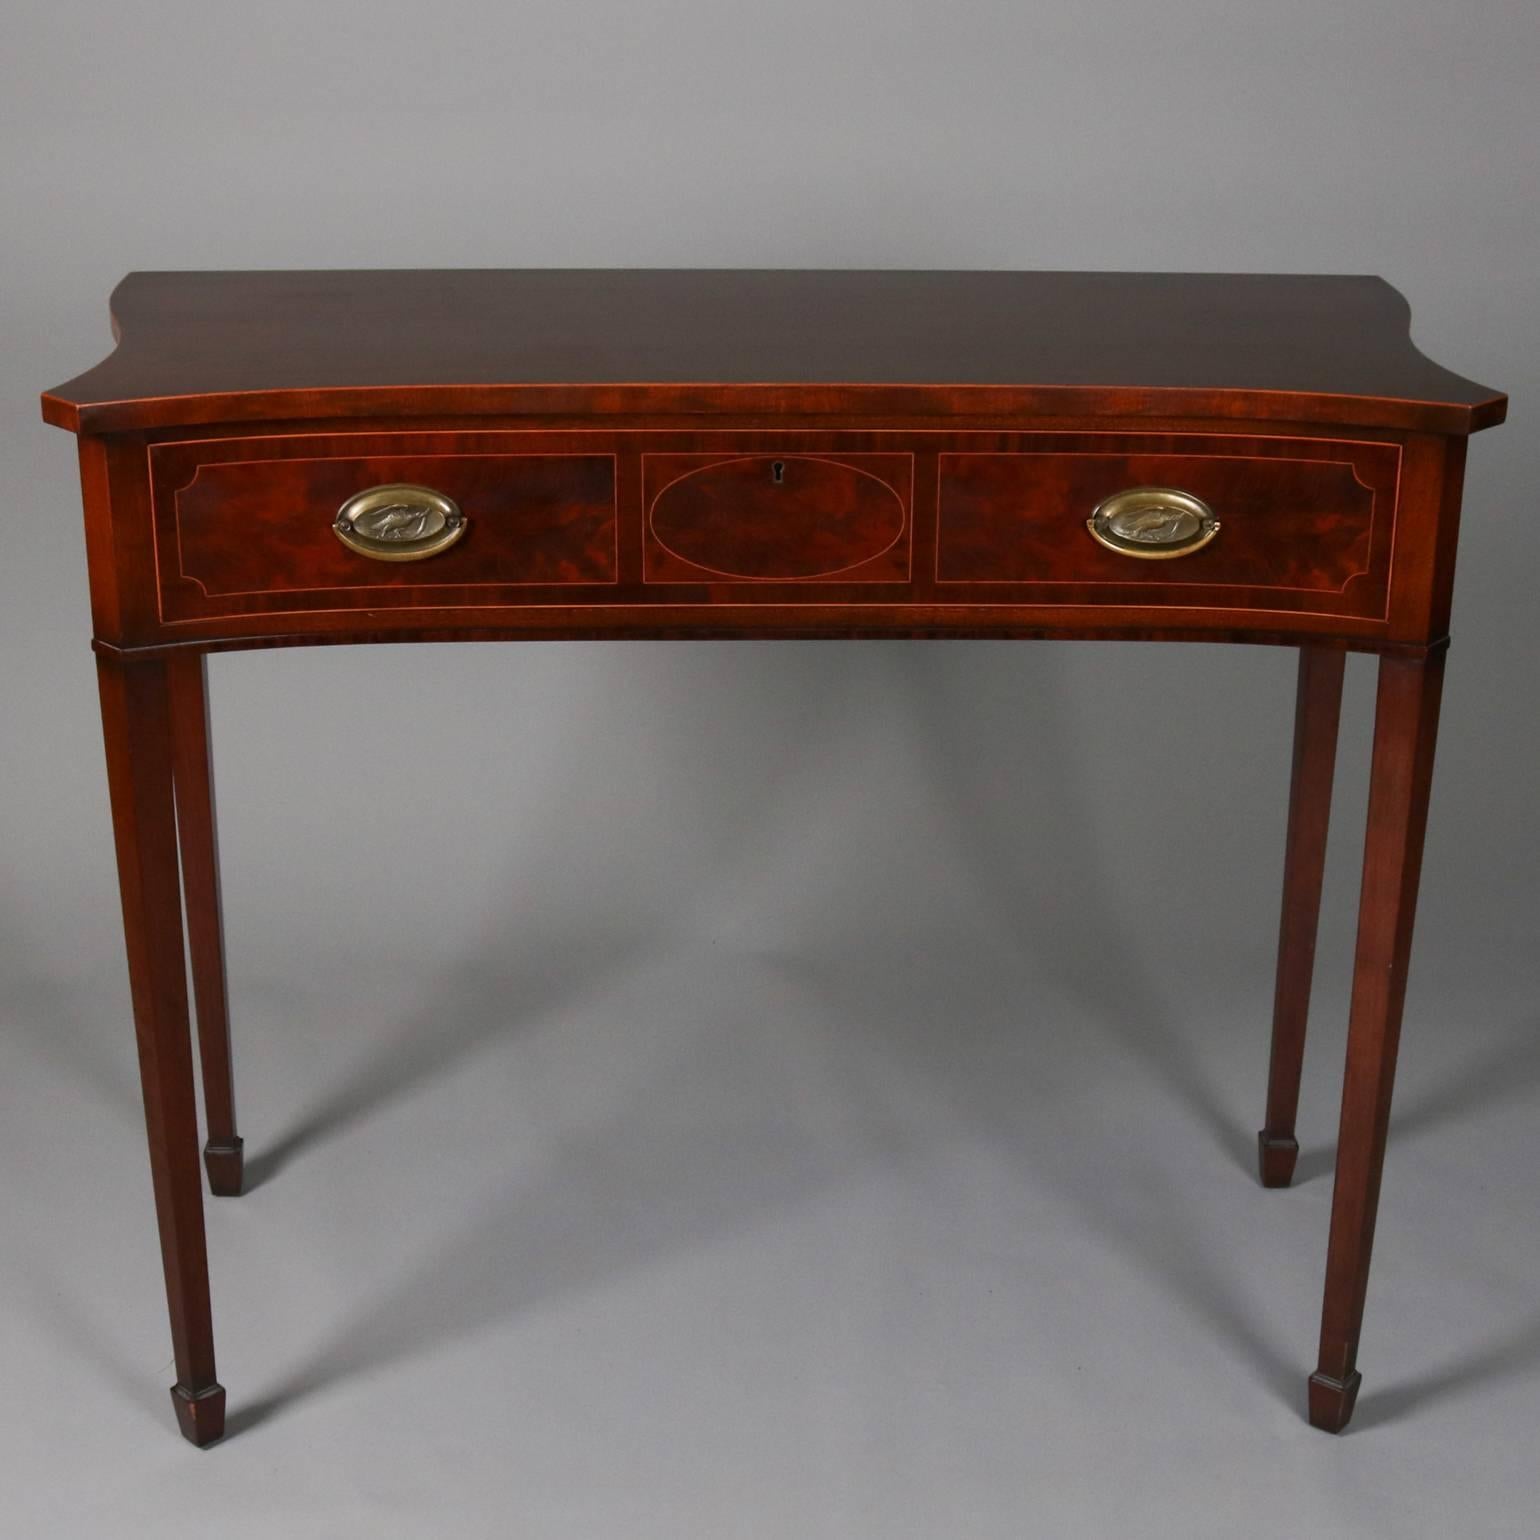 Antique English flame mahogany Hepplewhite School server features satinwood banding on top surface and front, bronze pulls, tapered legs terminating in spade feet, 19th century

Measures: 36" H x 44.5" W x 21" D.